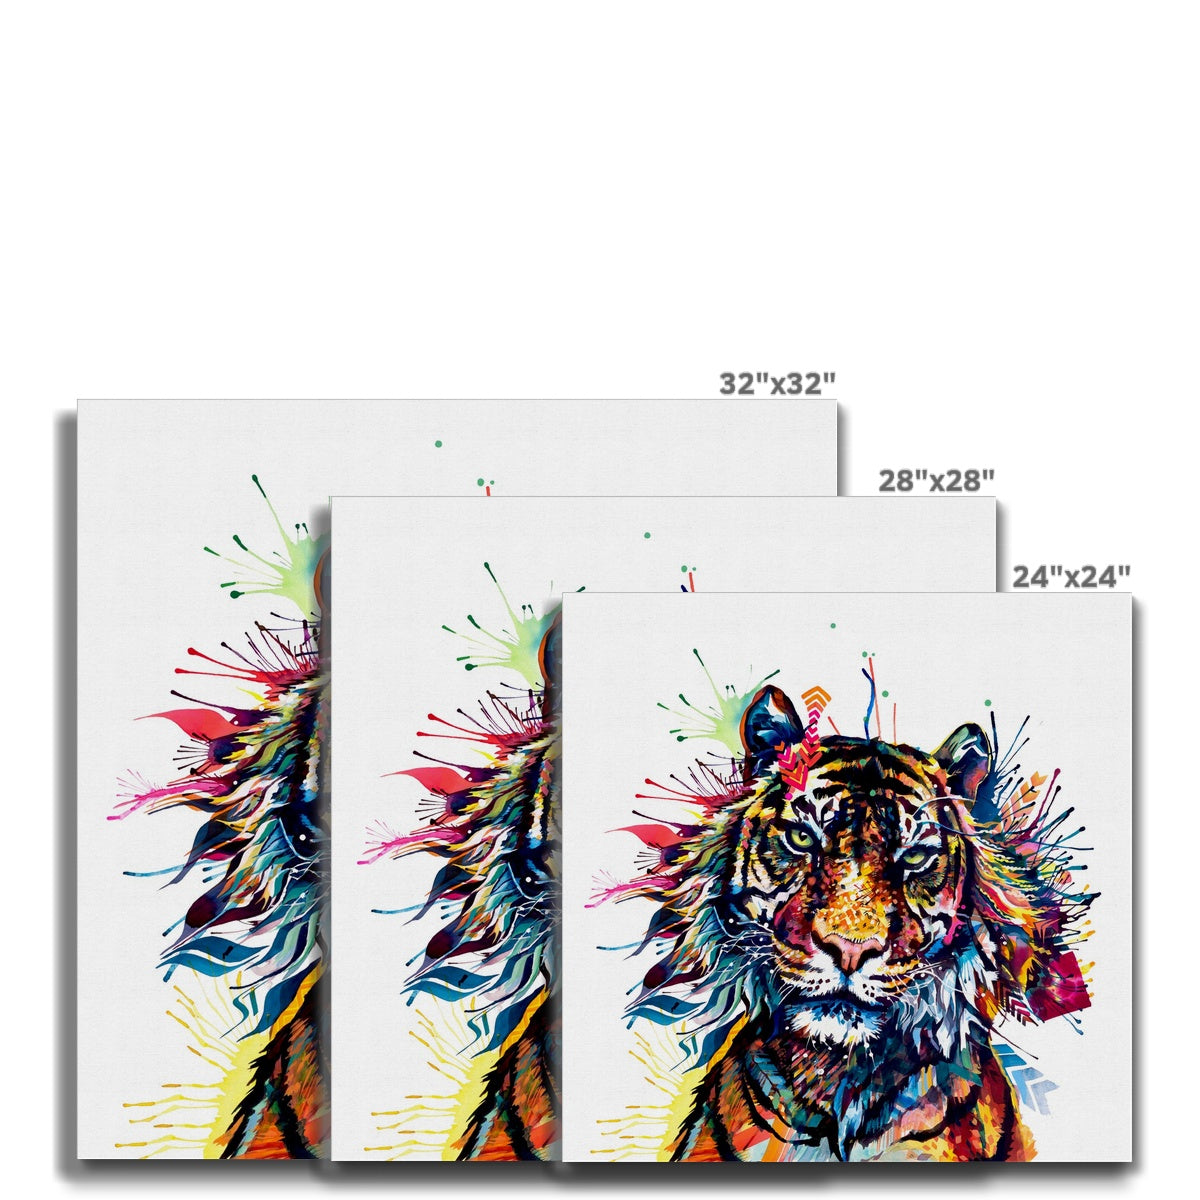 Clifford the Tiger Canvas